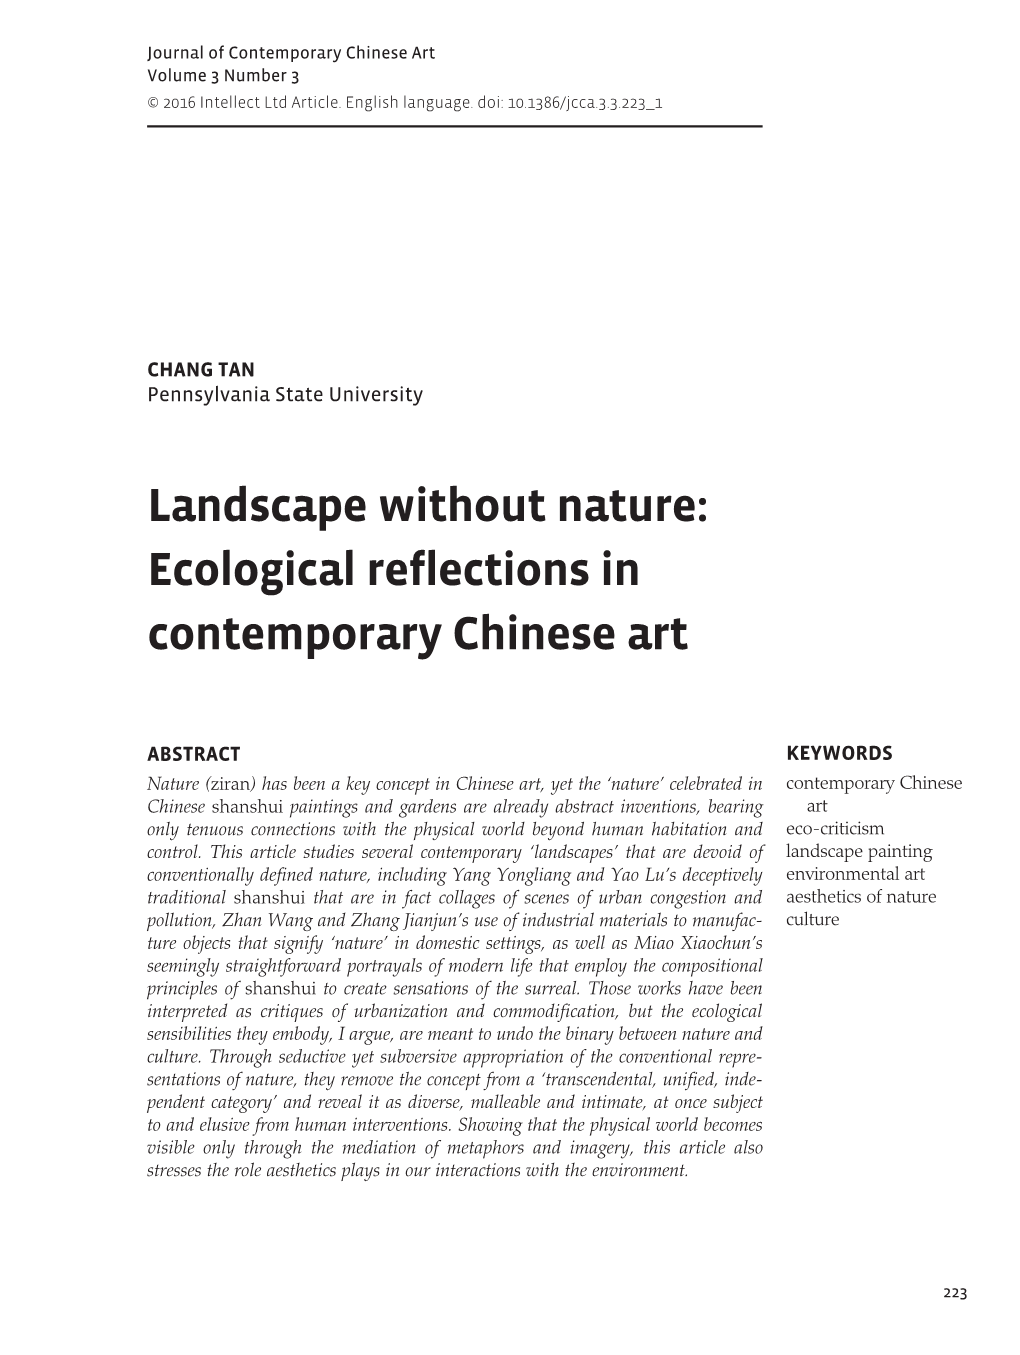 Landscape Without Nature: Ecological Reflections in Contemporary Chinese Art